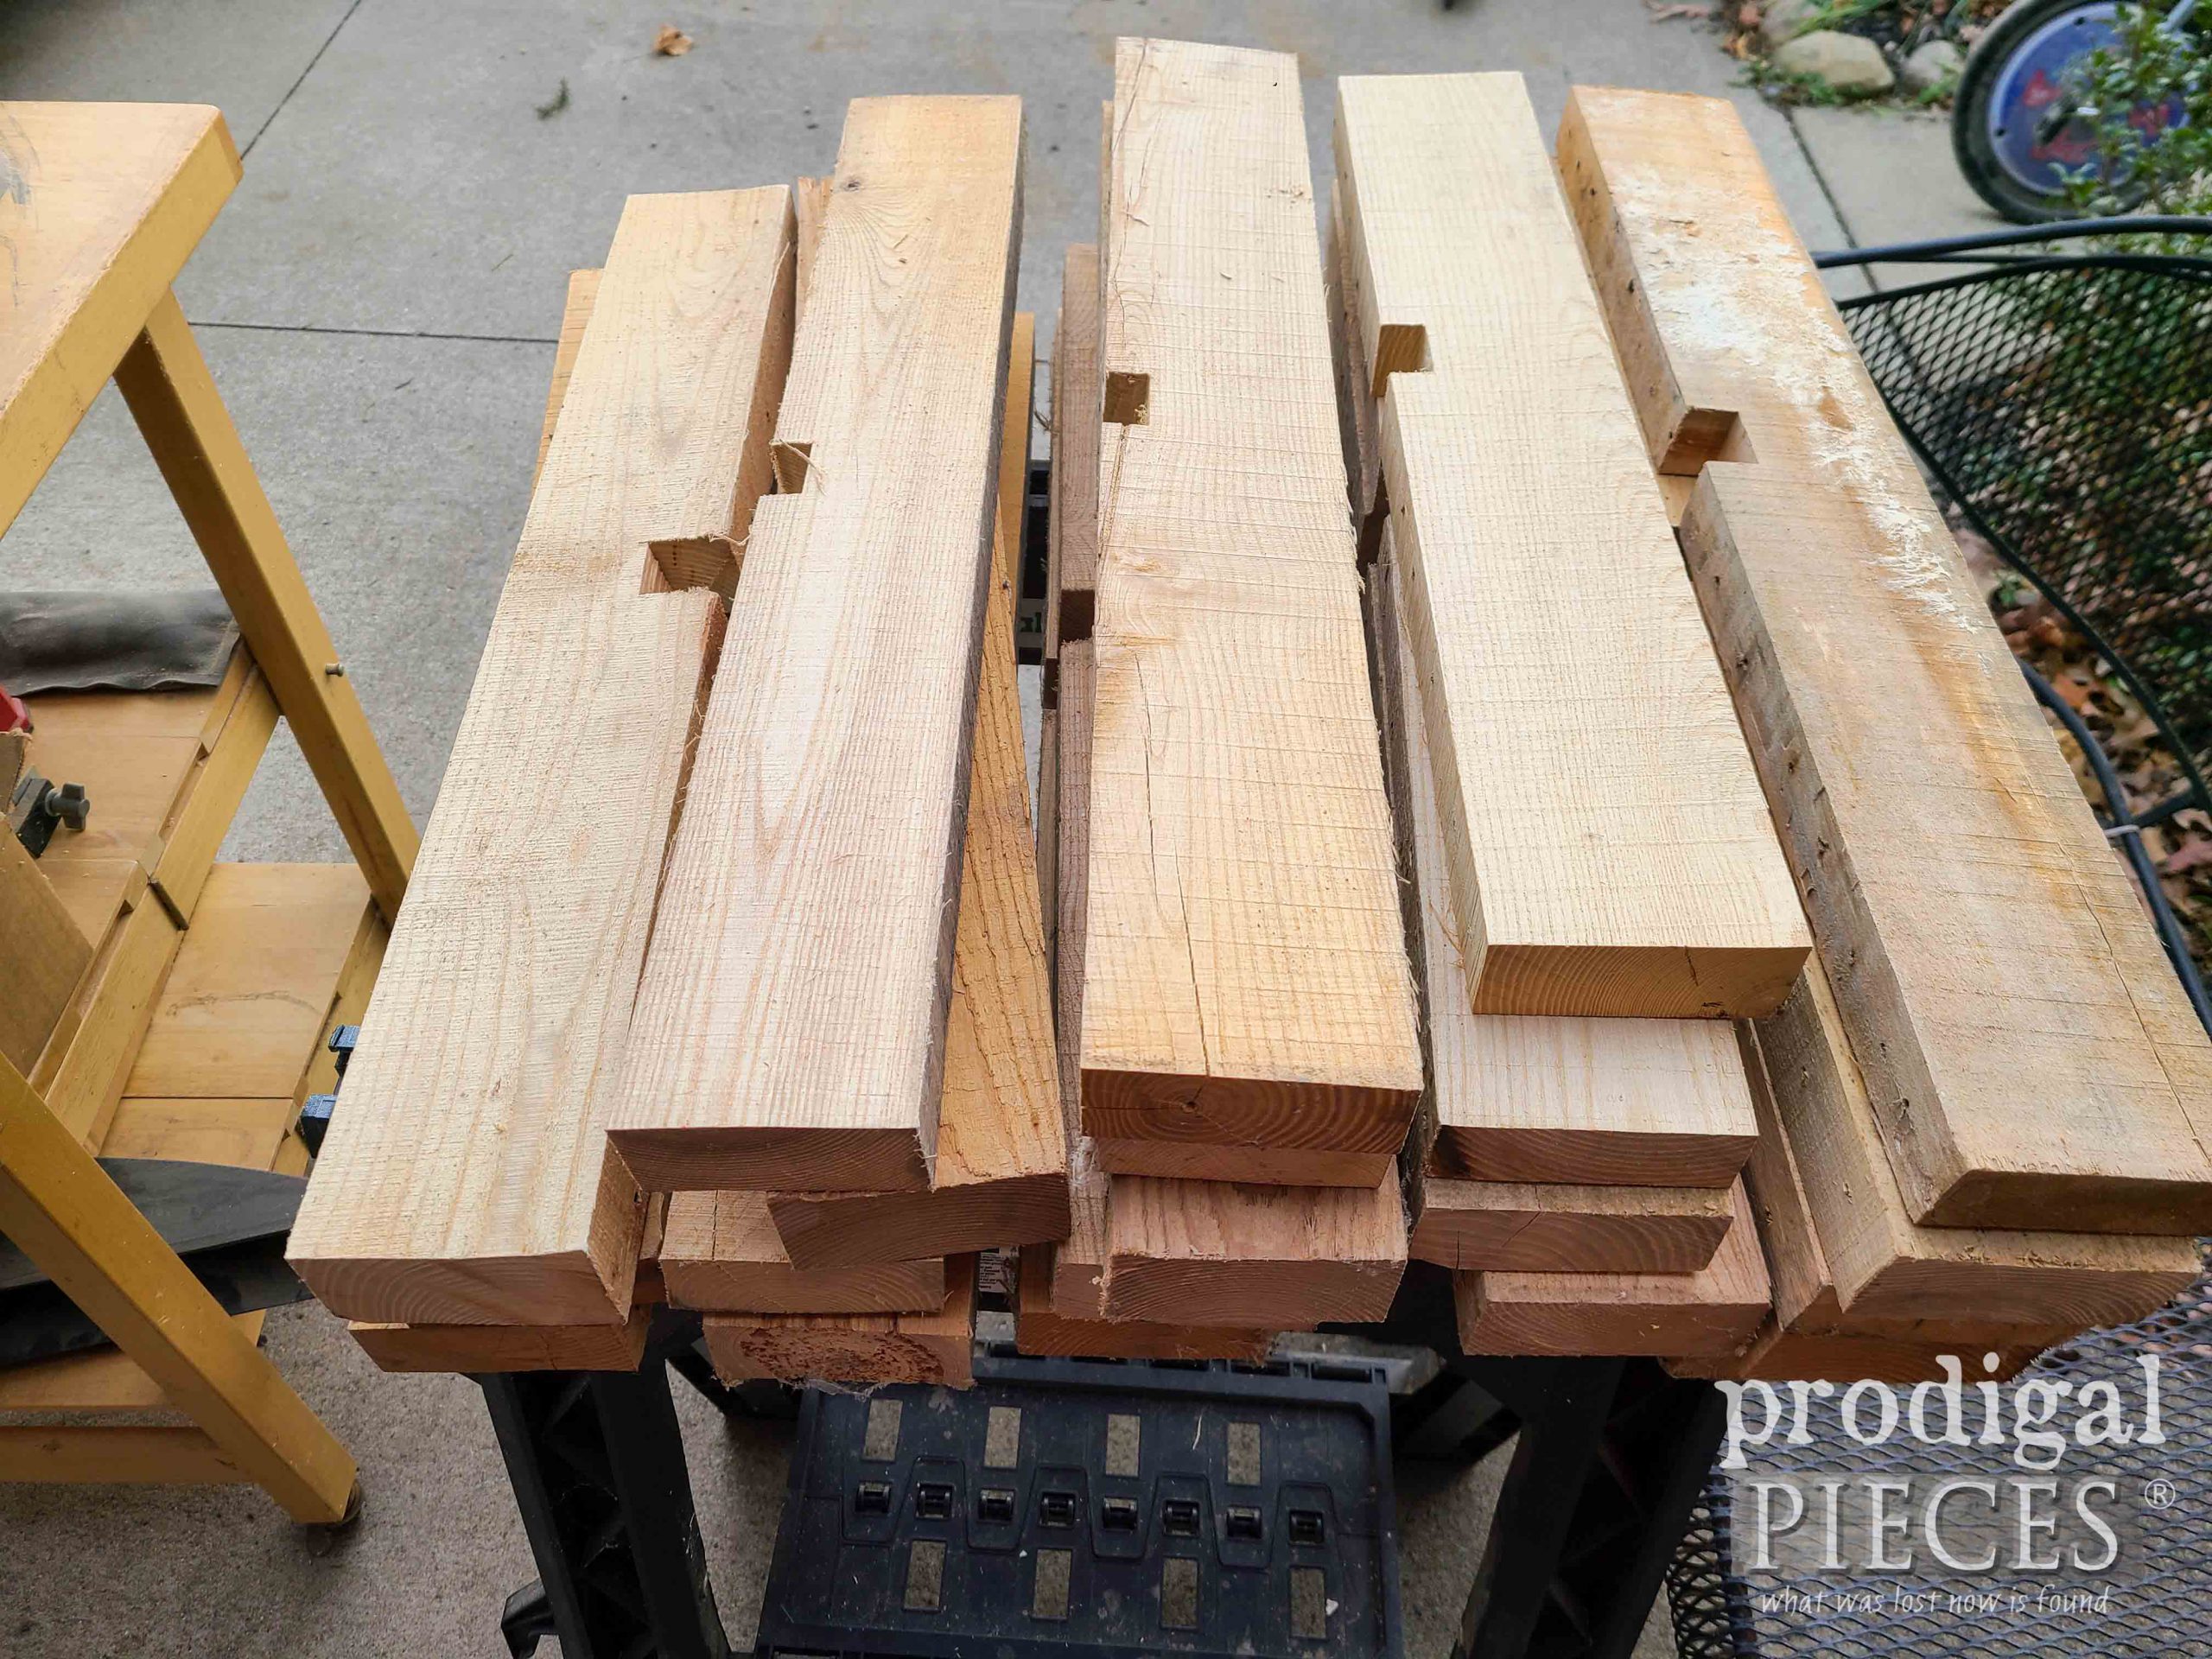 Reclaimed Pallet Wood Before Planing | prodigalpieces.com